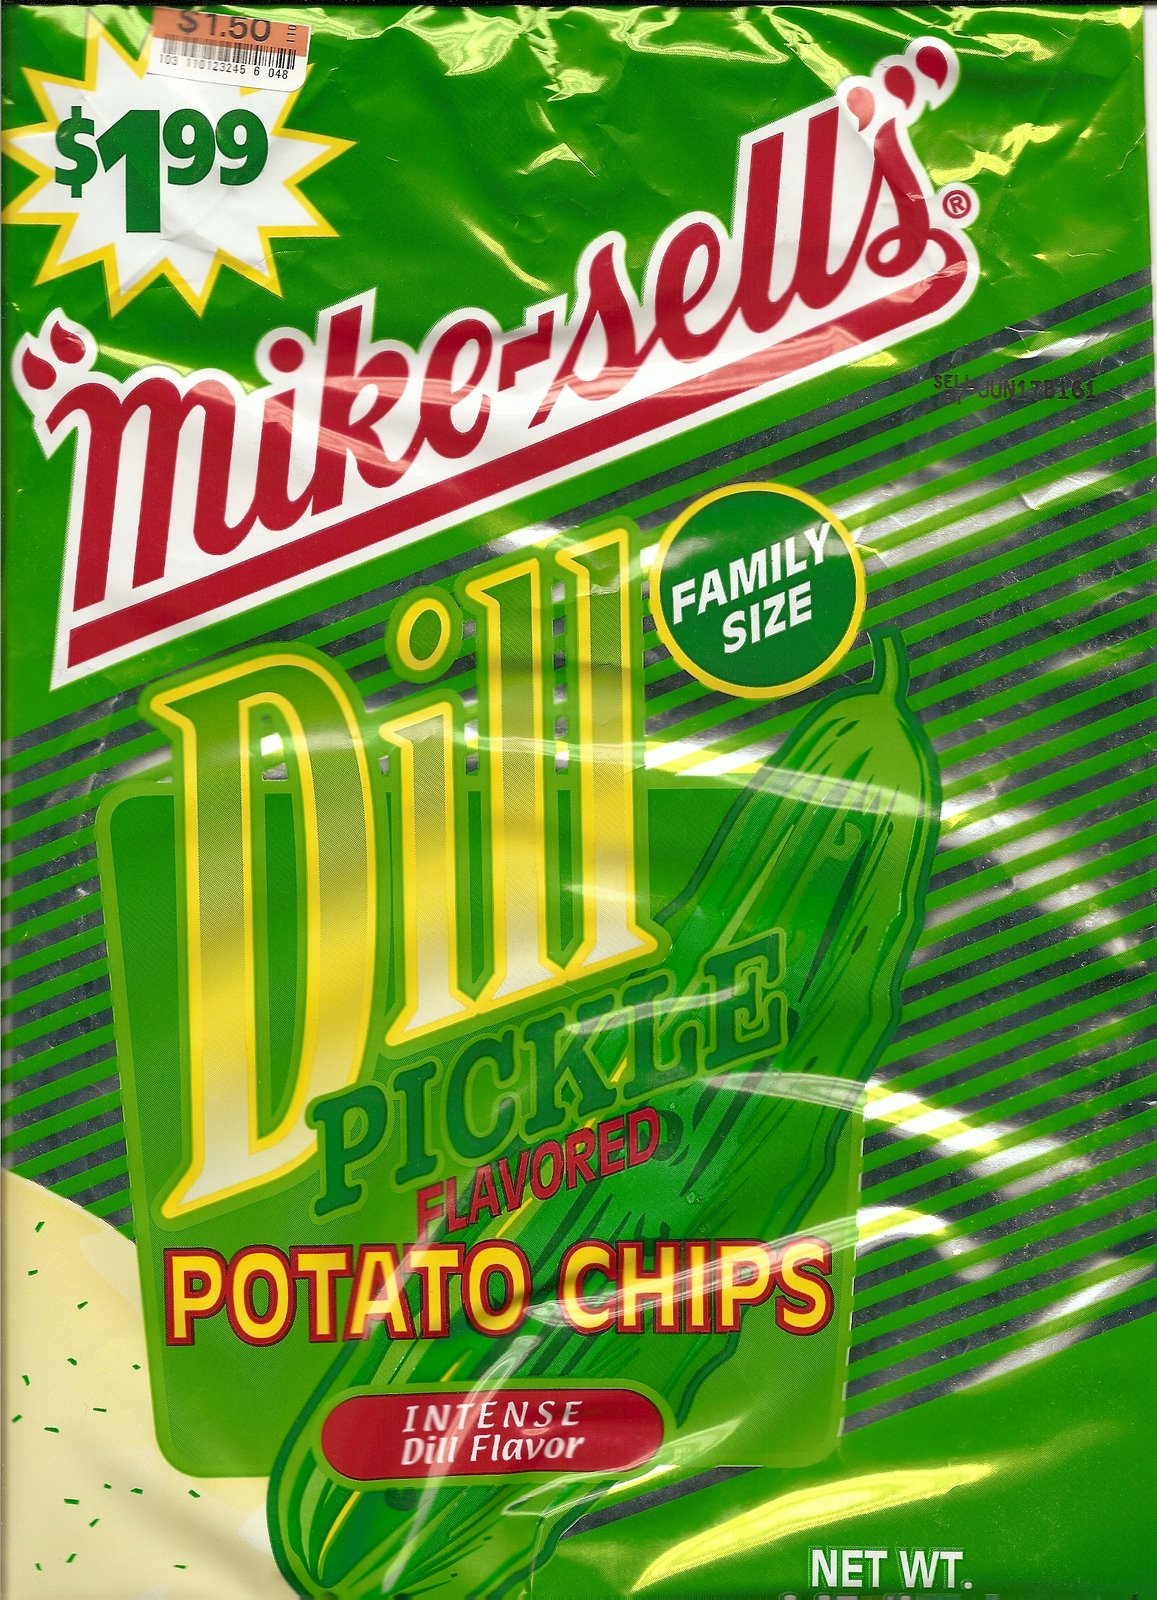 [Mike-Sells+Dill+chips.JPG]